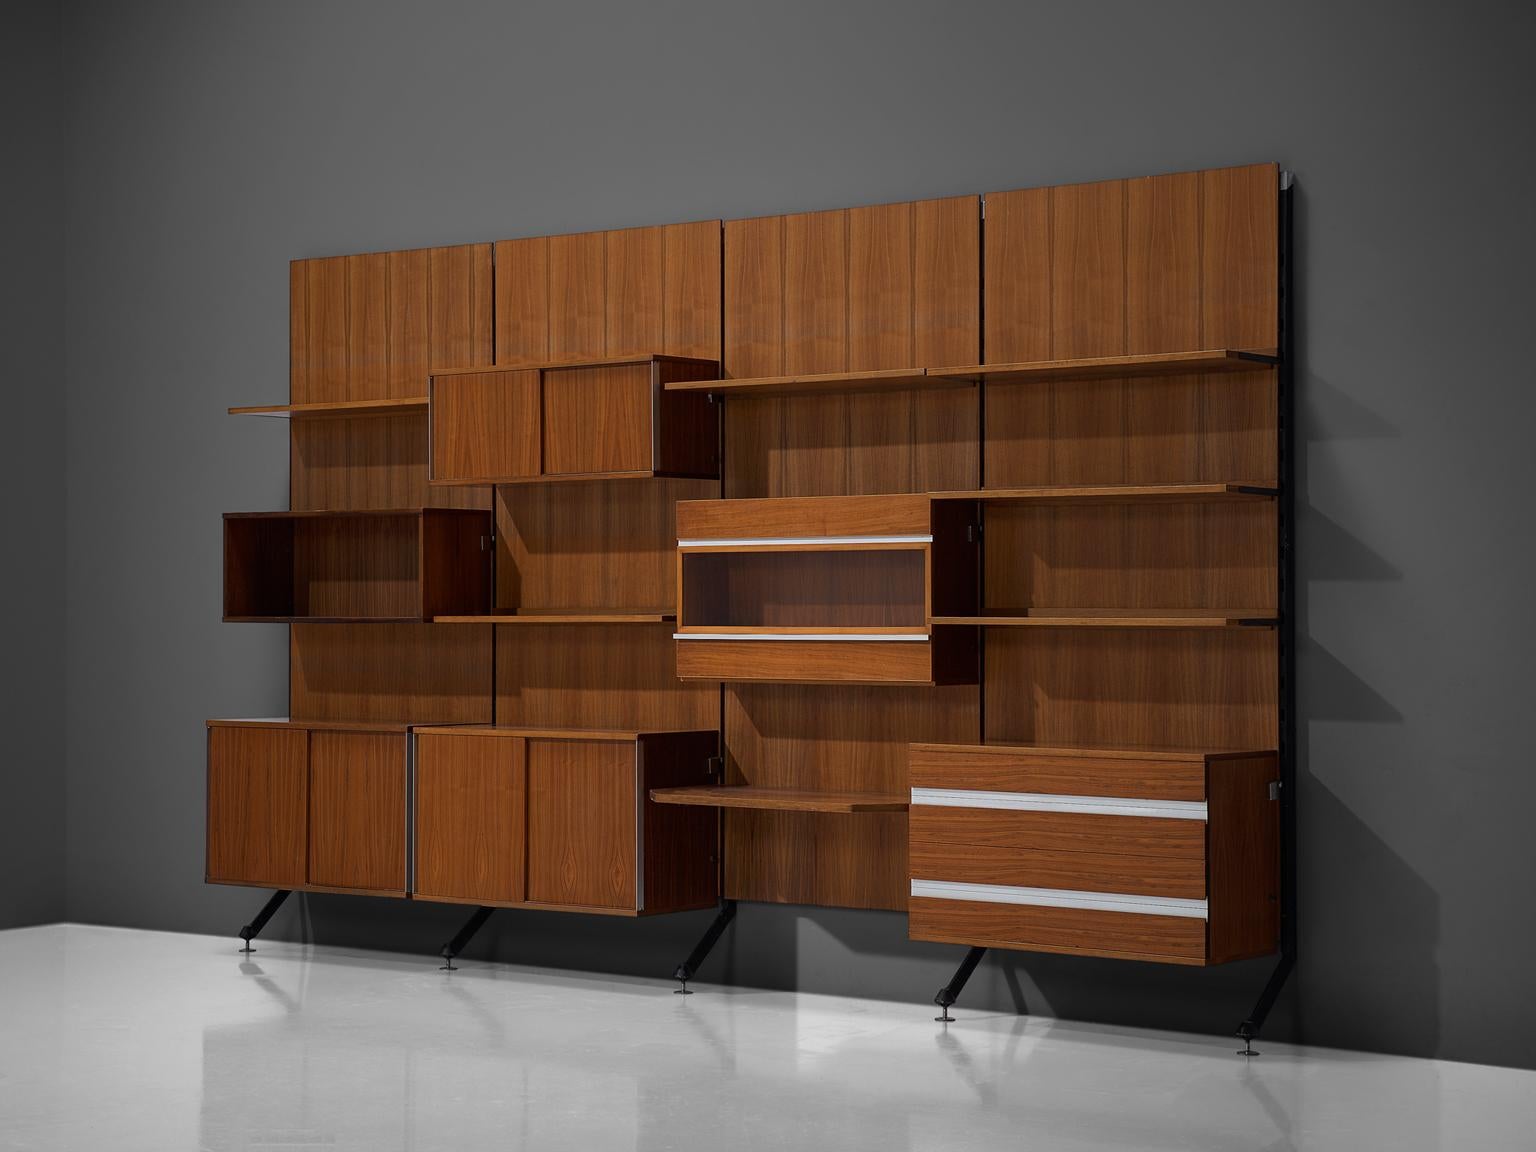 MIM Roma, cabinet, teak and aluminium, Italy, 1960s.

The monumental wall-mounted cabinet consists of four wall panels with various different storage facilities such as shelves, drawers and cabinet. The finish and details of this shelving wall